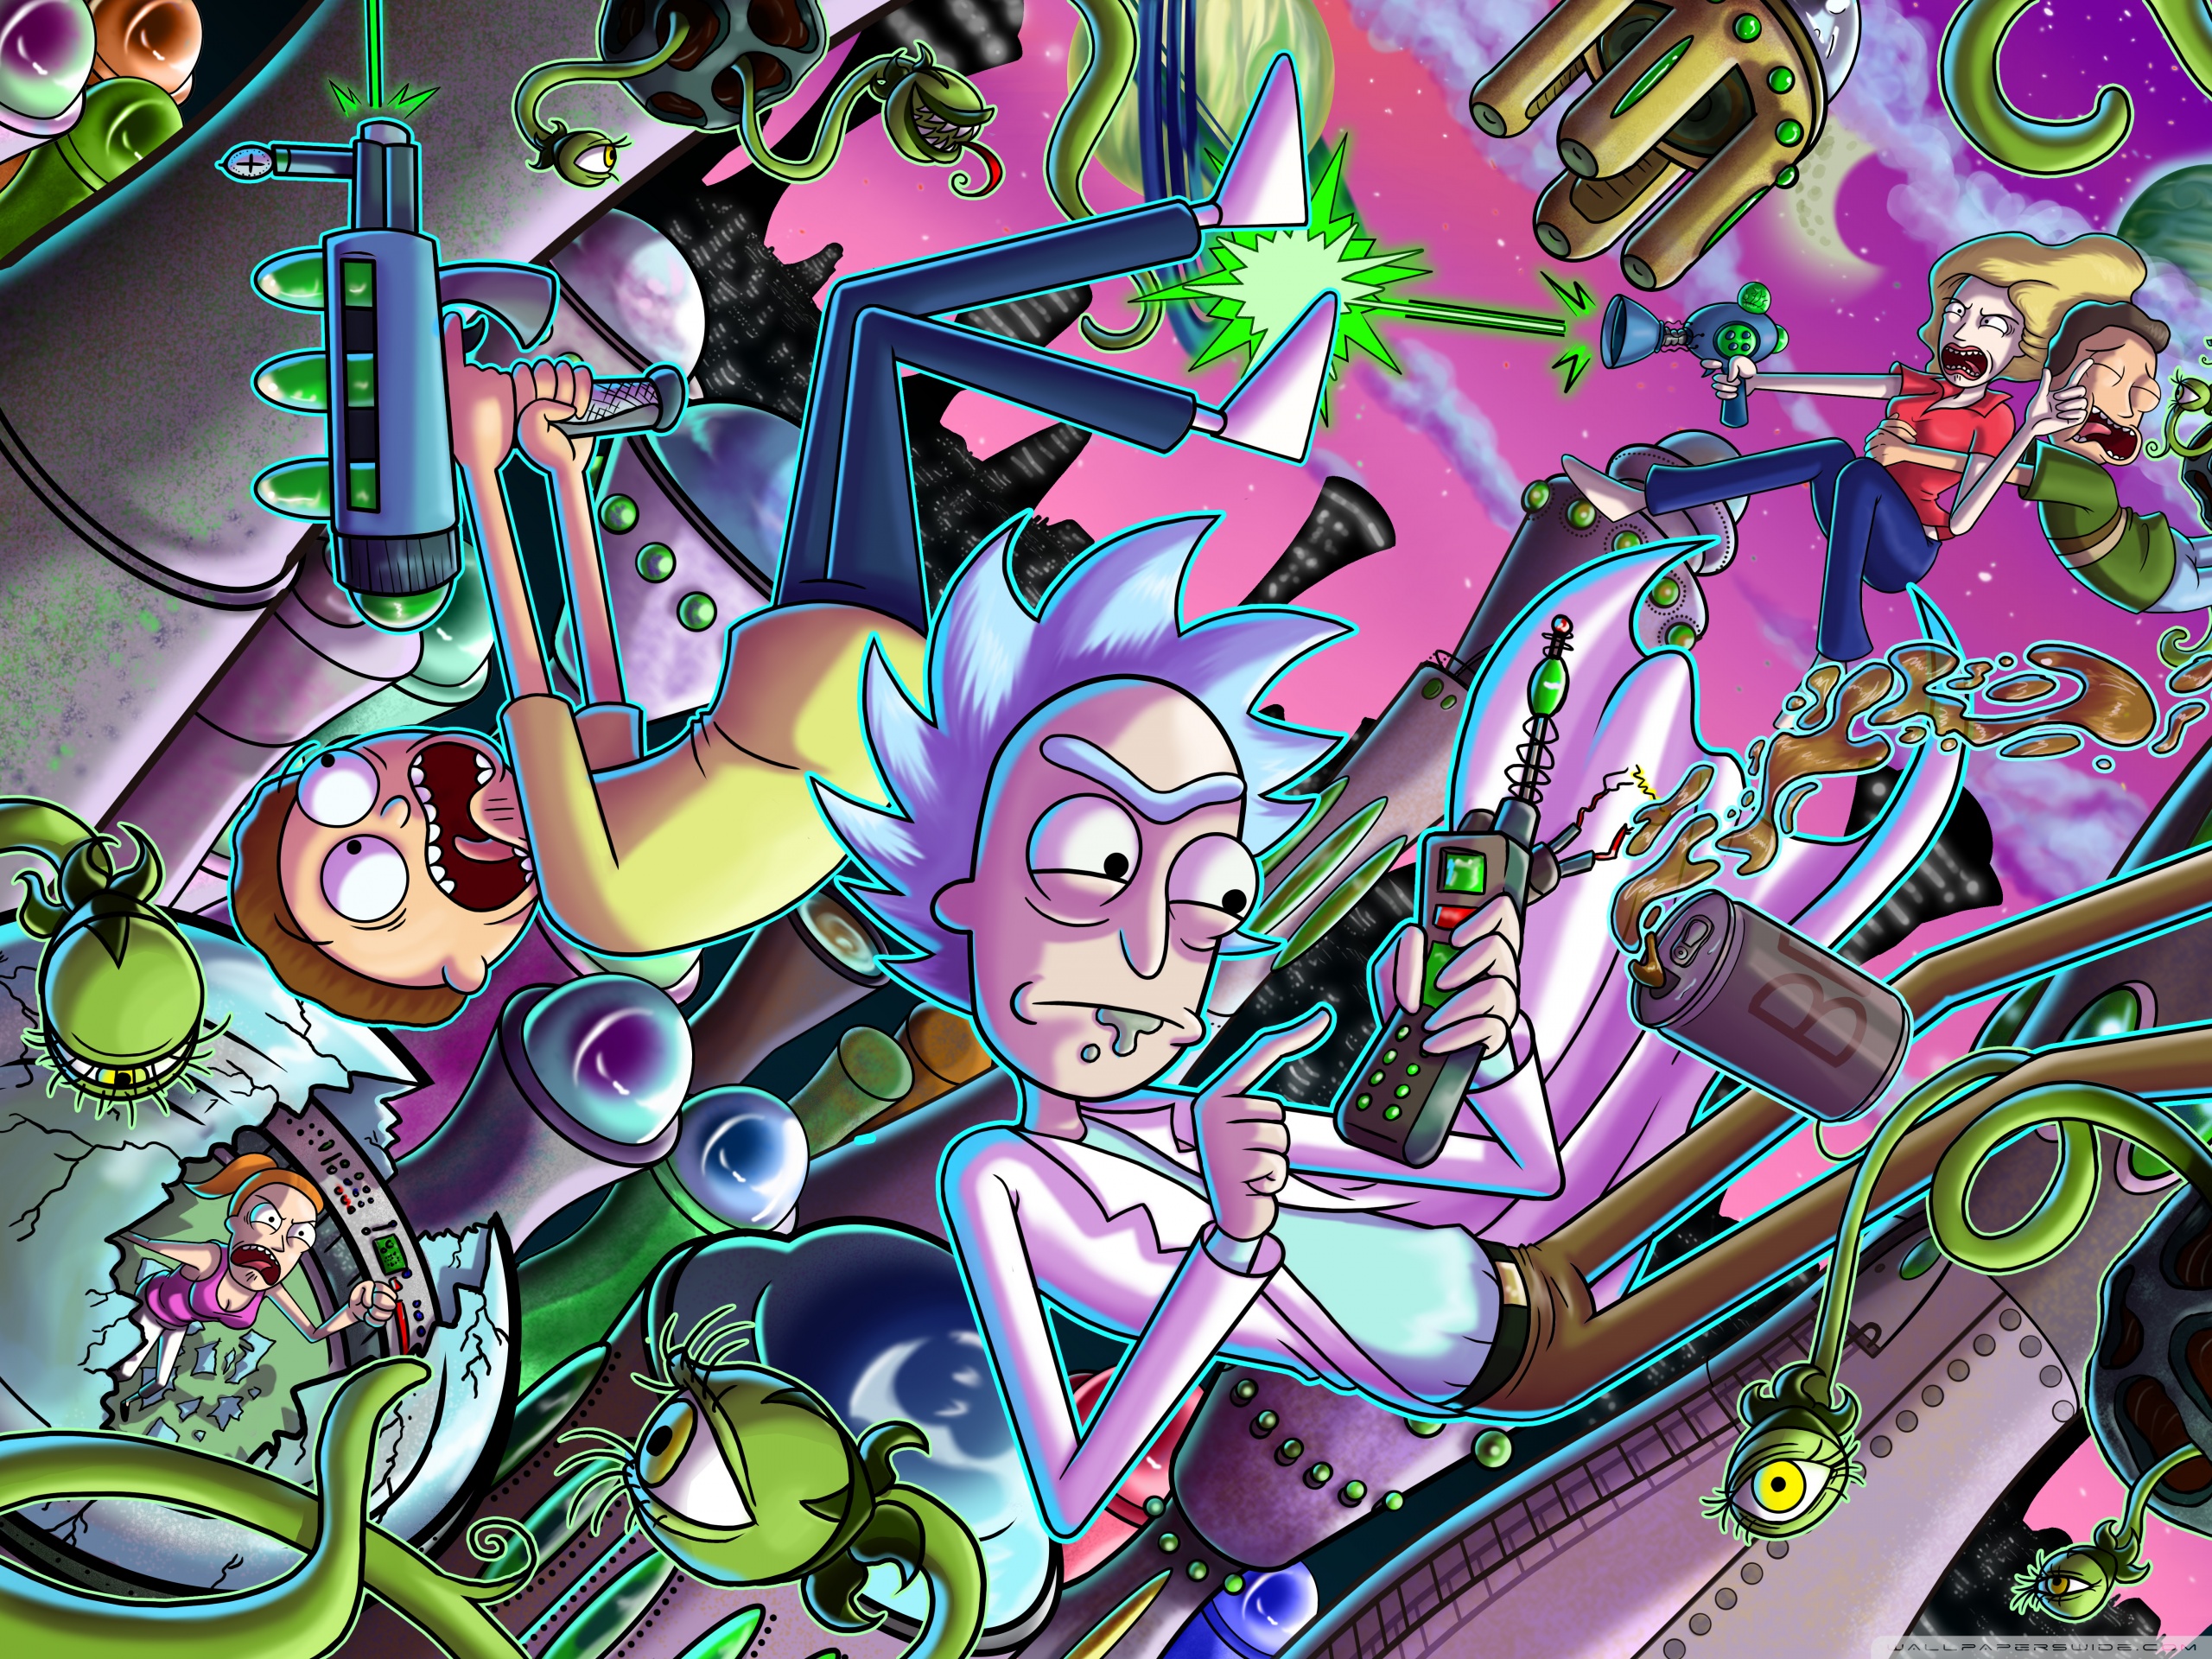 640x1136 Resolution Rick and Morty in Outer Space iPhone 55c5SSE Ipod  Touch Wallpaper  Wallpapers Den